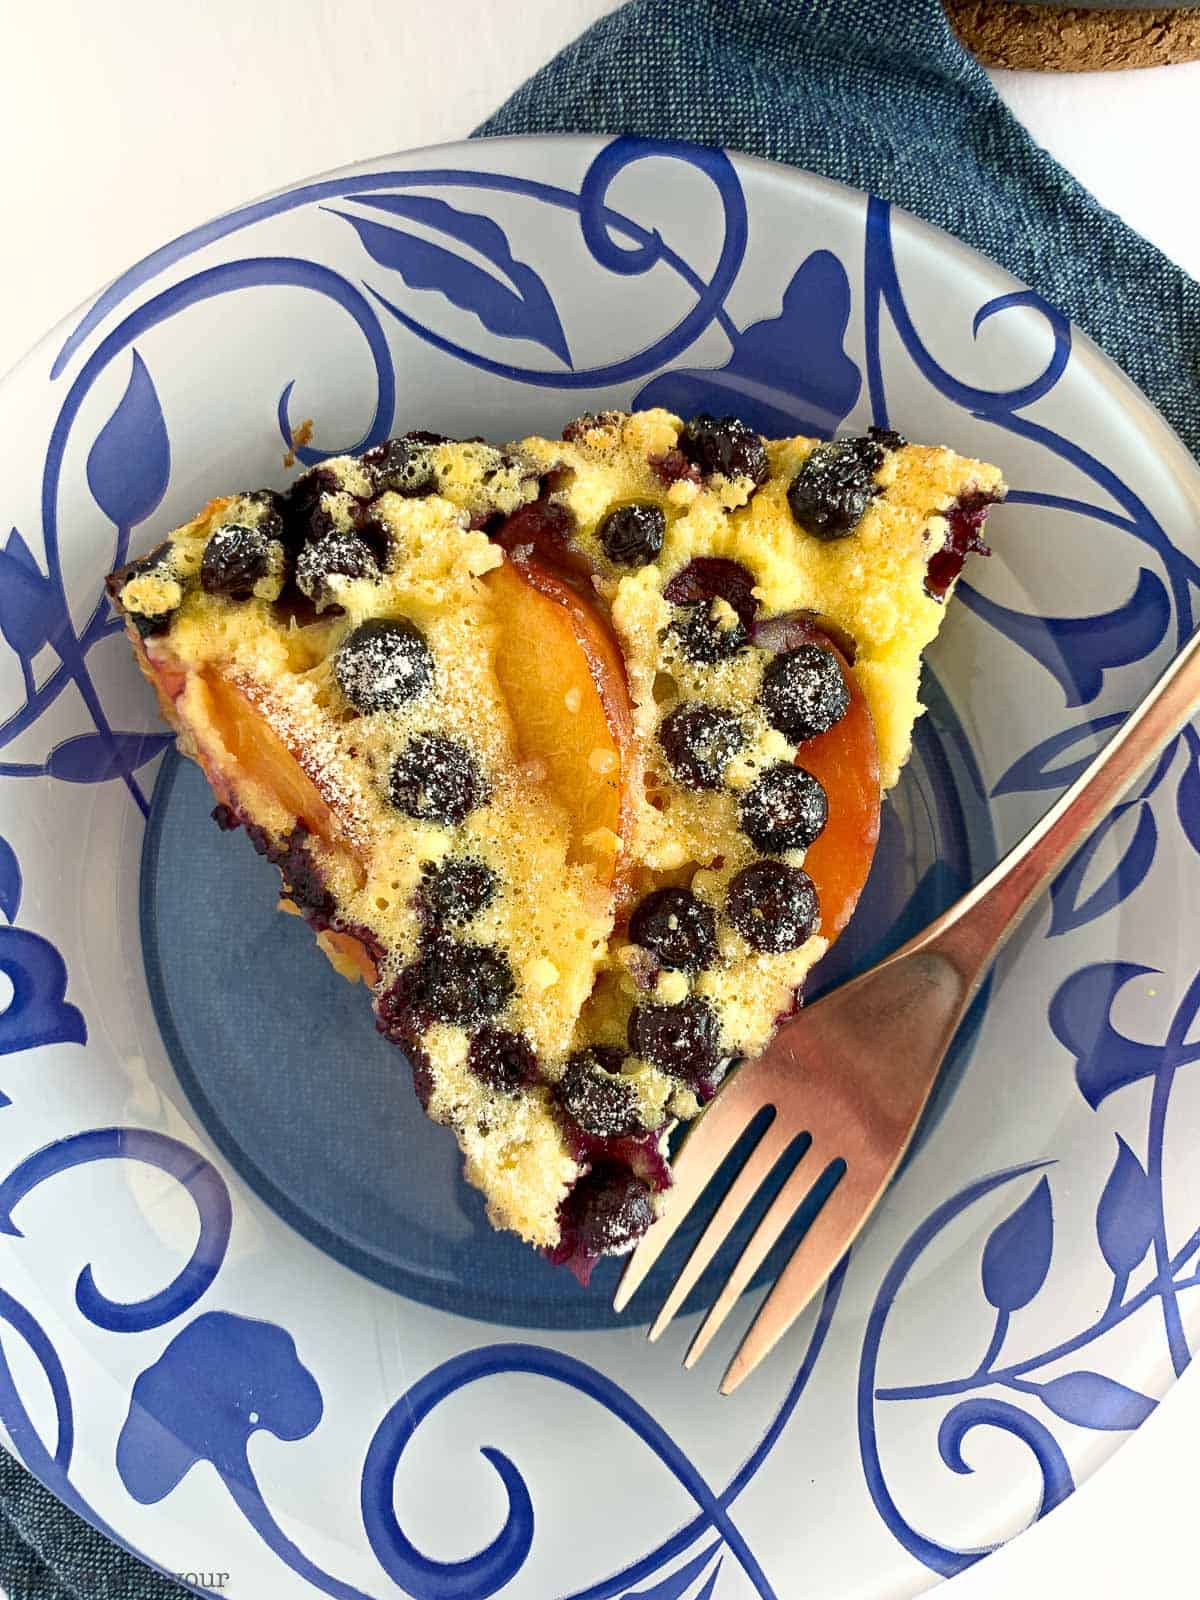 Close up view of Gluten-Free Blueberry Peach Clafoutis on a blue patterned plate